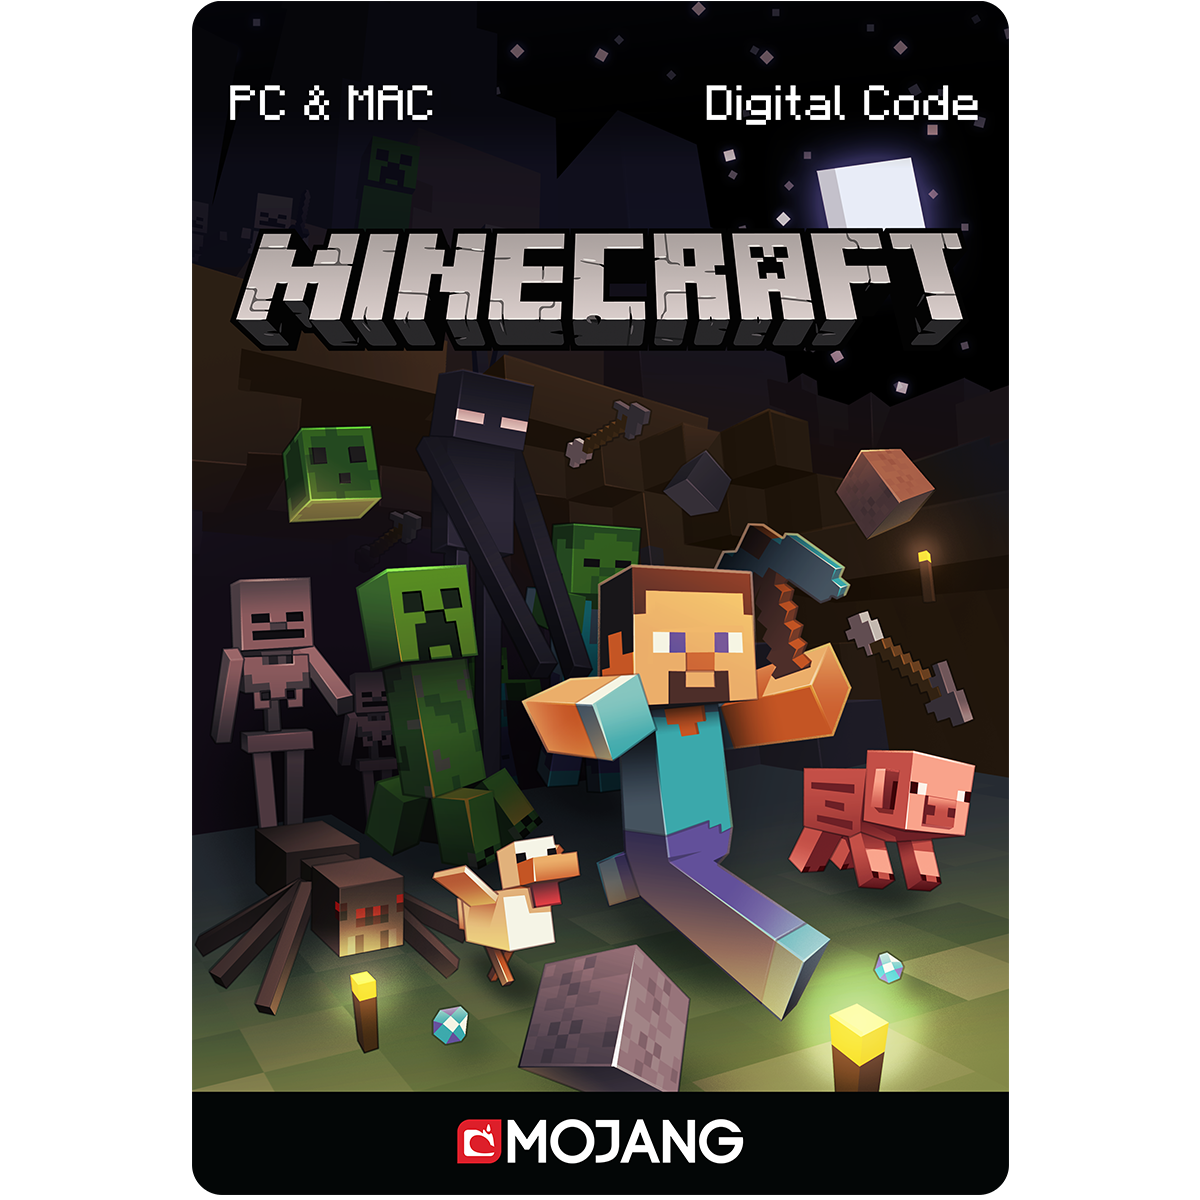 Minecraft: Java Edition for PC/Mac [Online Game Code]  Gift Card Generator